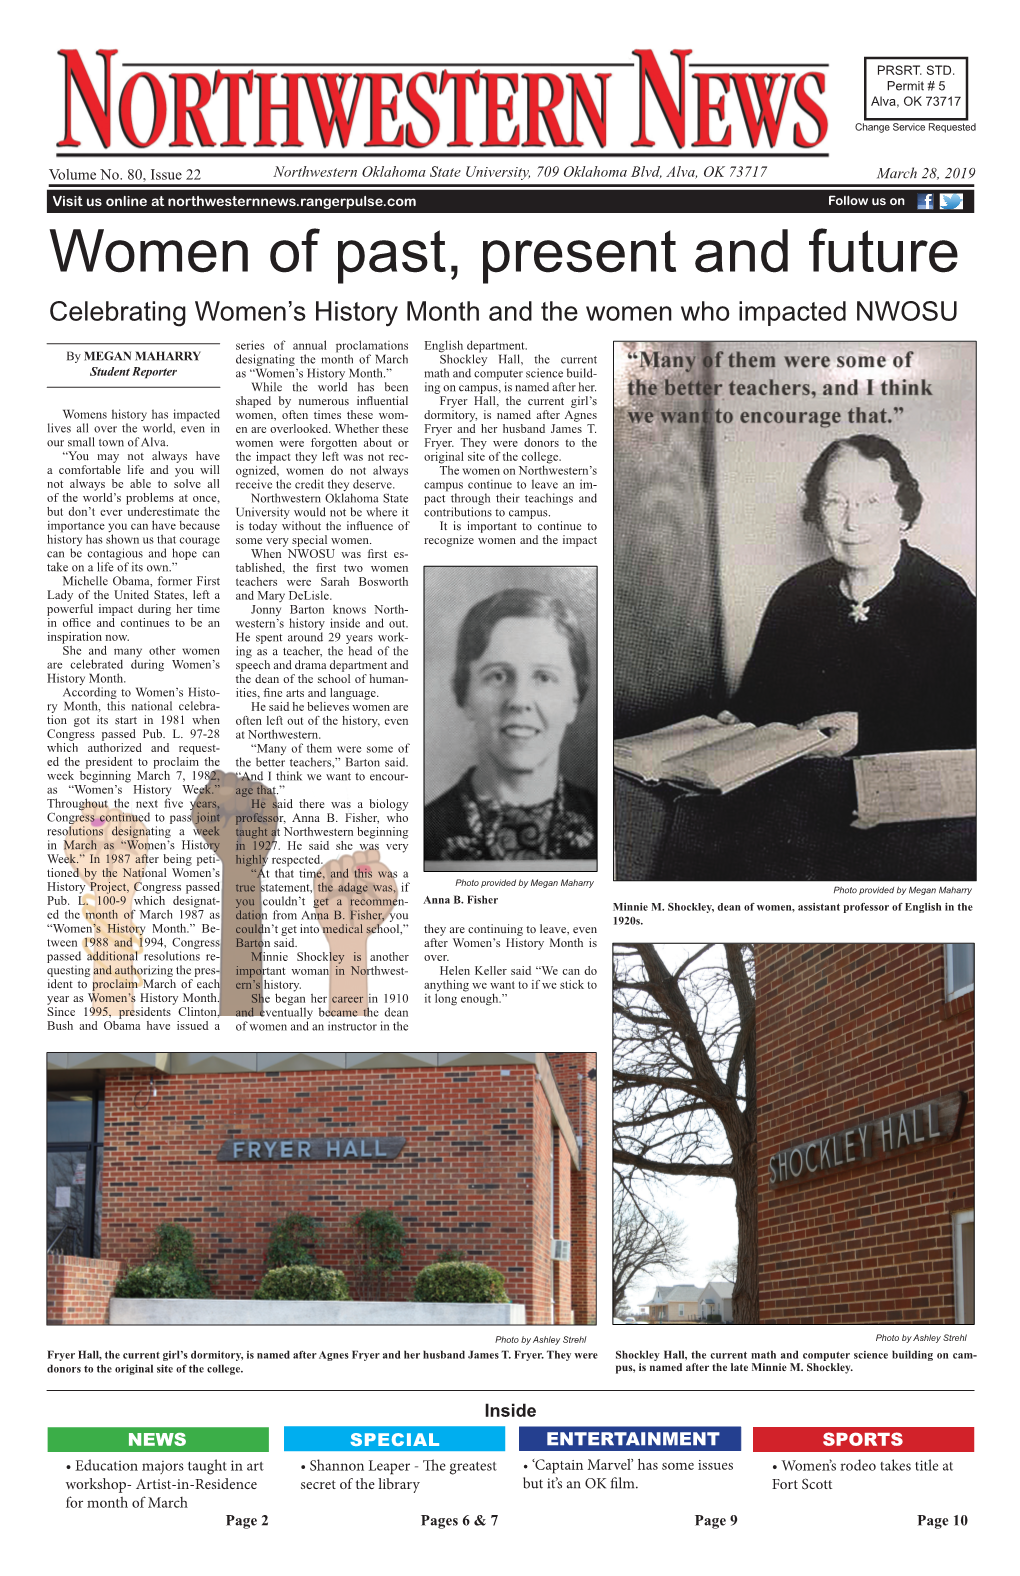 Women of Past, Present and Future Celebrating Women’S History Month and the Women Who Impacted NWOSU Series of Annual Proclamations English Department